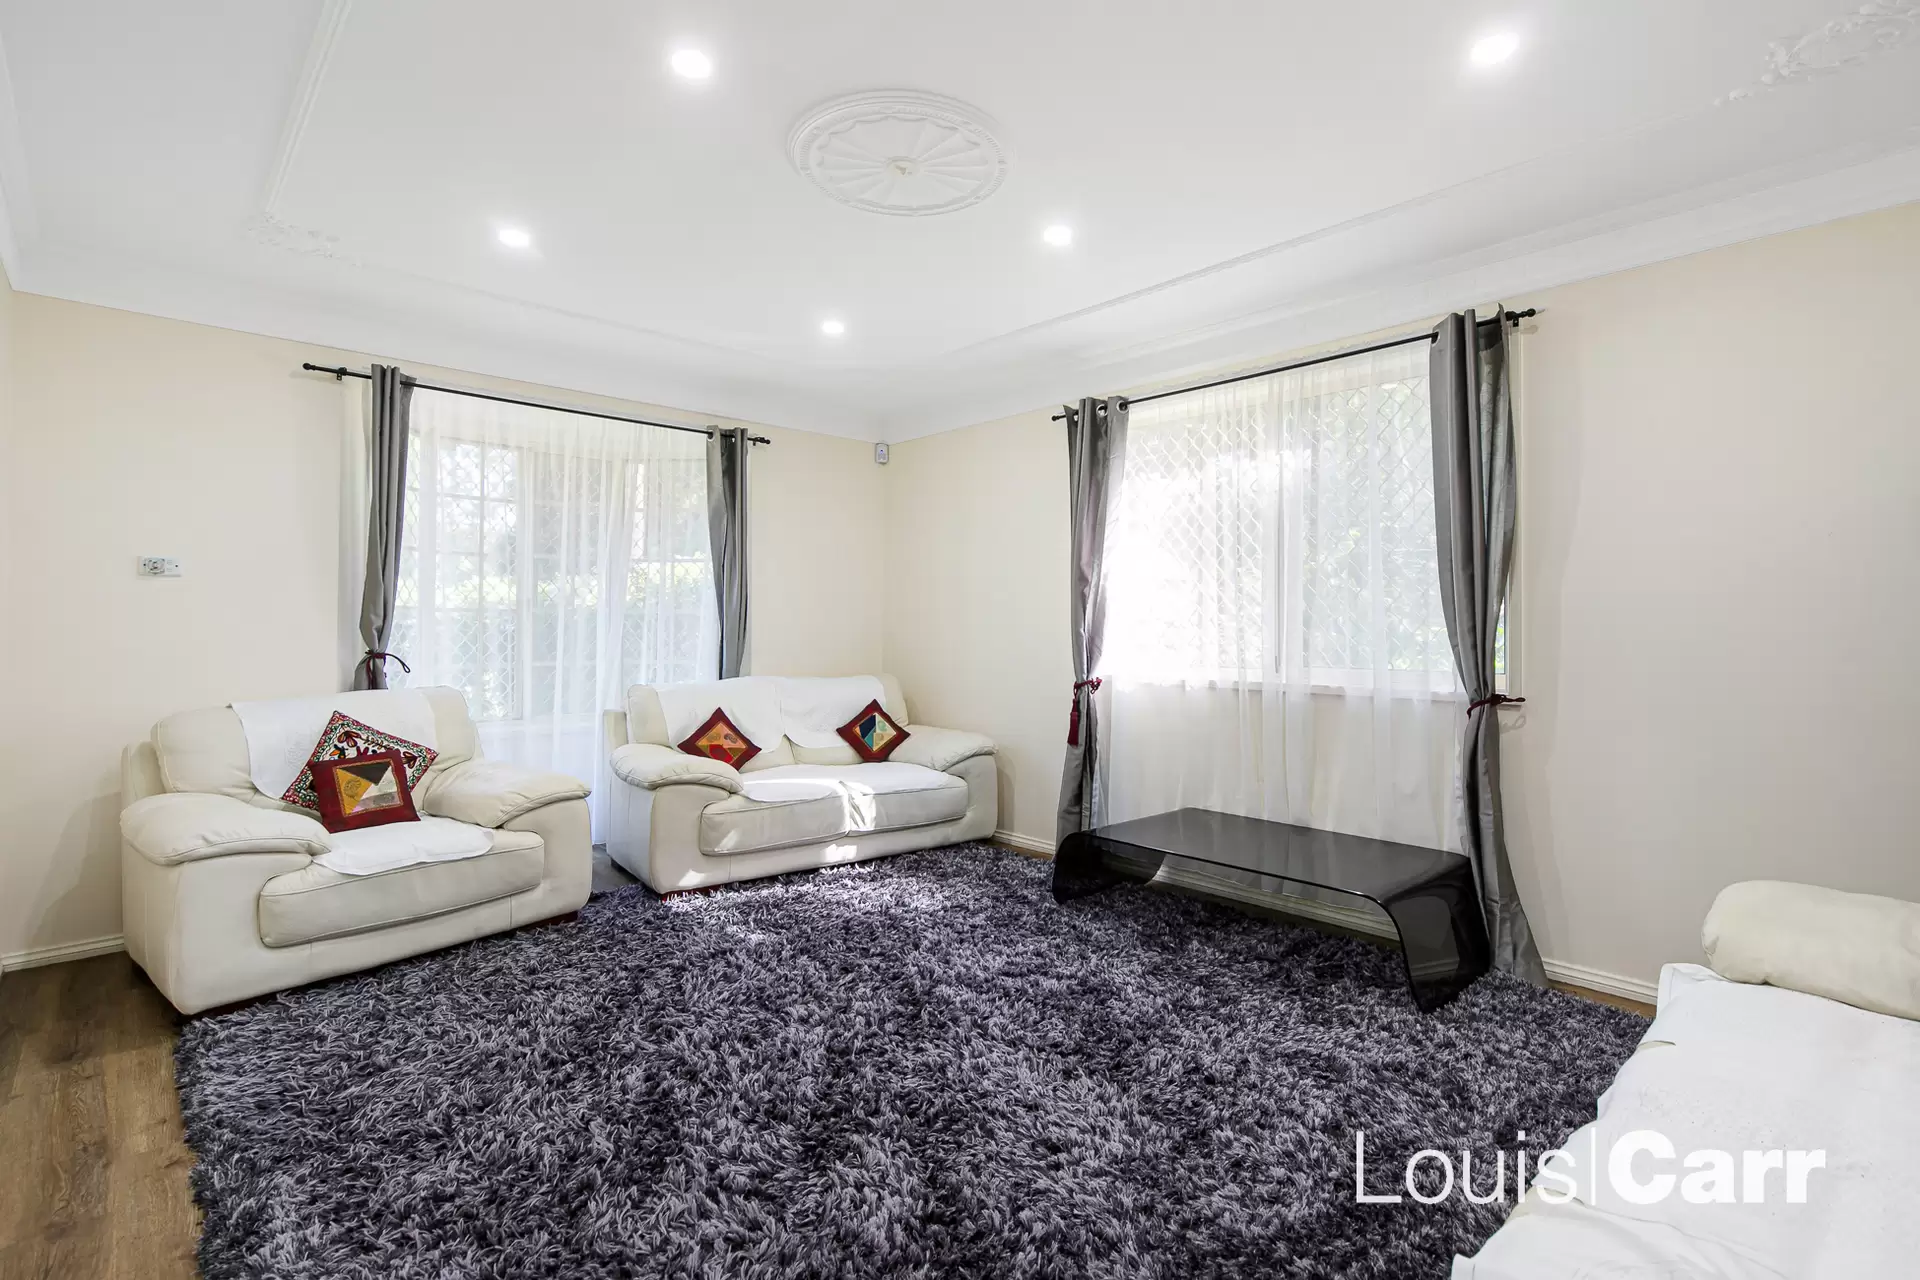 Photo #4: 47 Taylor Street, West Pennant Hills - Leased by Louis Carr Real Estate